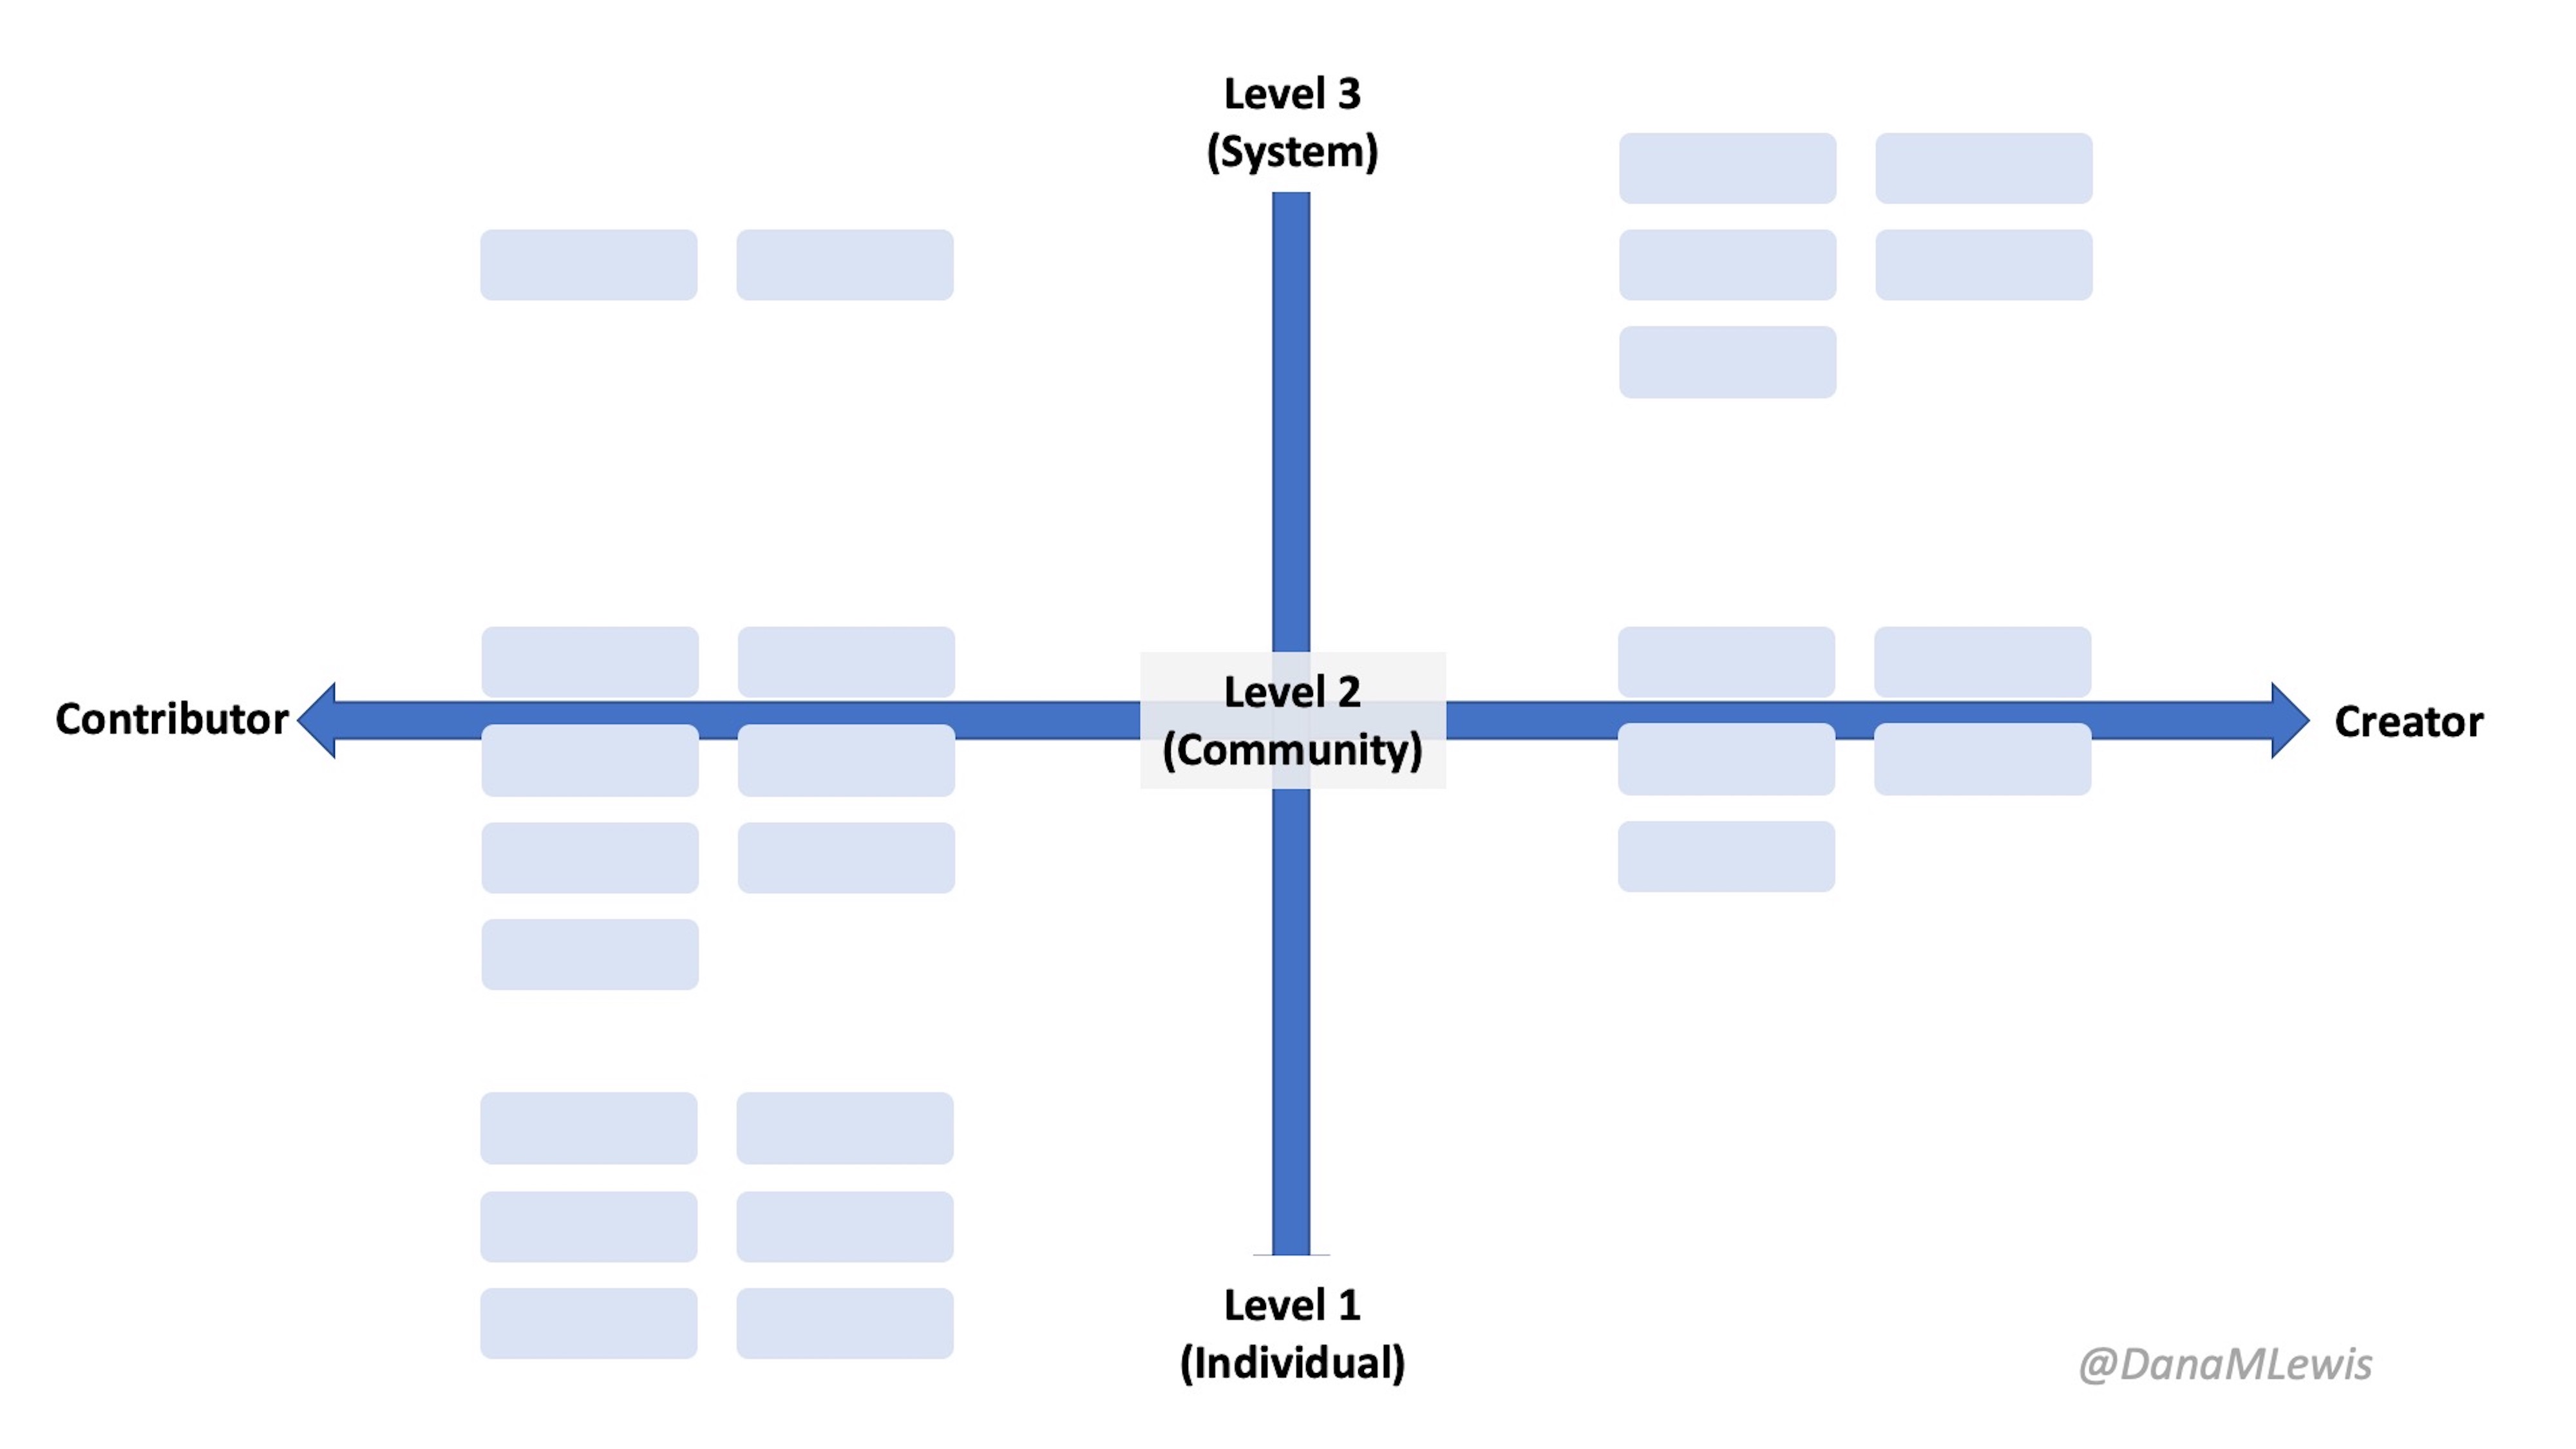 Figure 1 from our paper, illustrating the Two-Spectrum Framework for Assessing Patient Experience. It shows a horizontal spectrum with "contributing" on the left and "creating" on the right. The vertical axis has "level 1 - individual" at the bottom; "level 2 - community" in the center, and "level 3 - systems" at the top. Light blue boxes, 25 in total, are arranged across this spectrum to illustrate where CTC participants are.